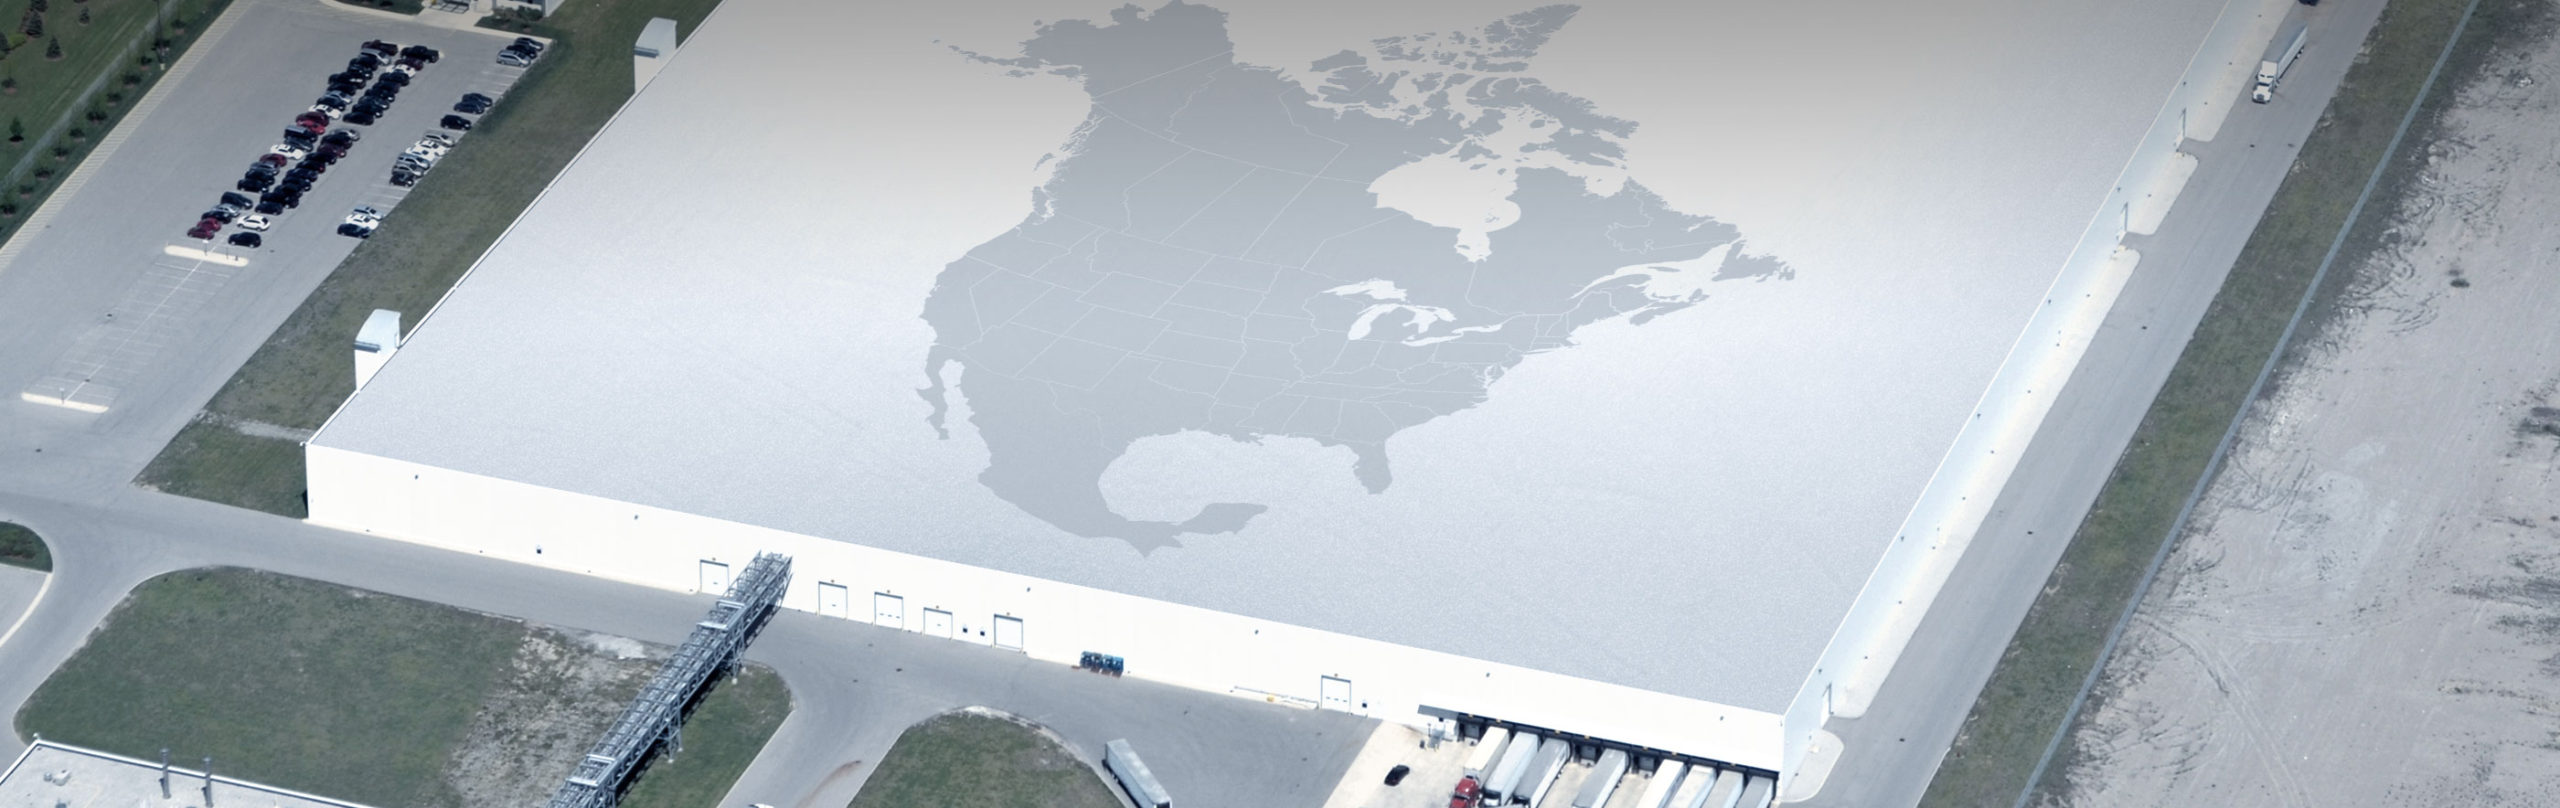 Overview of Empire Roofing project with map outline of North America